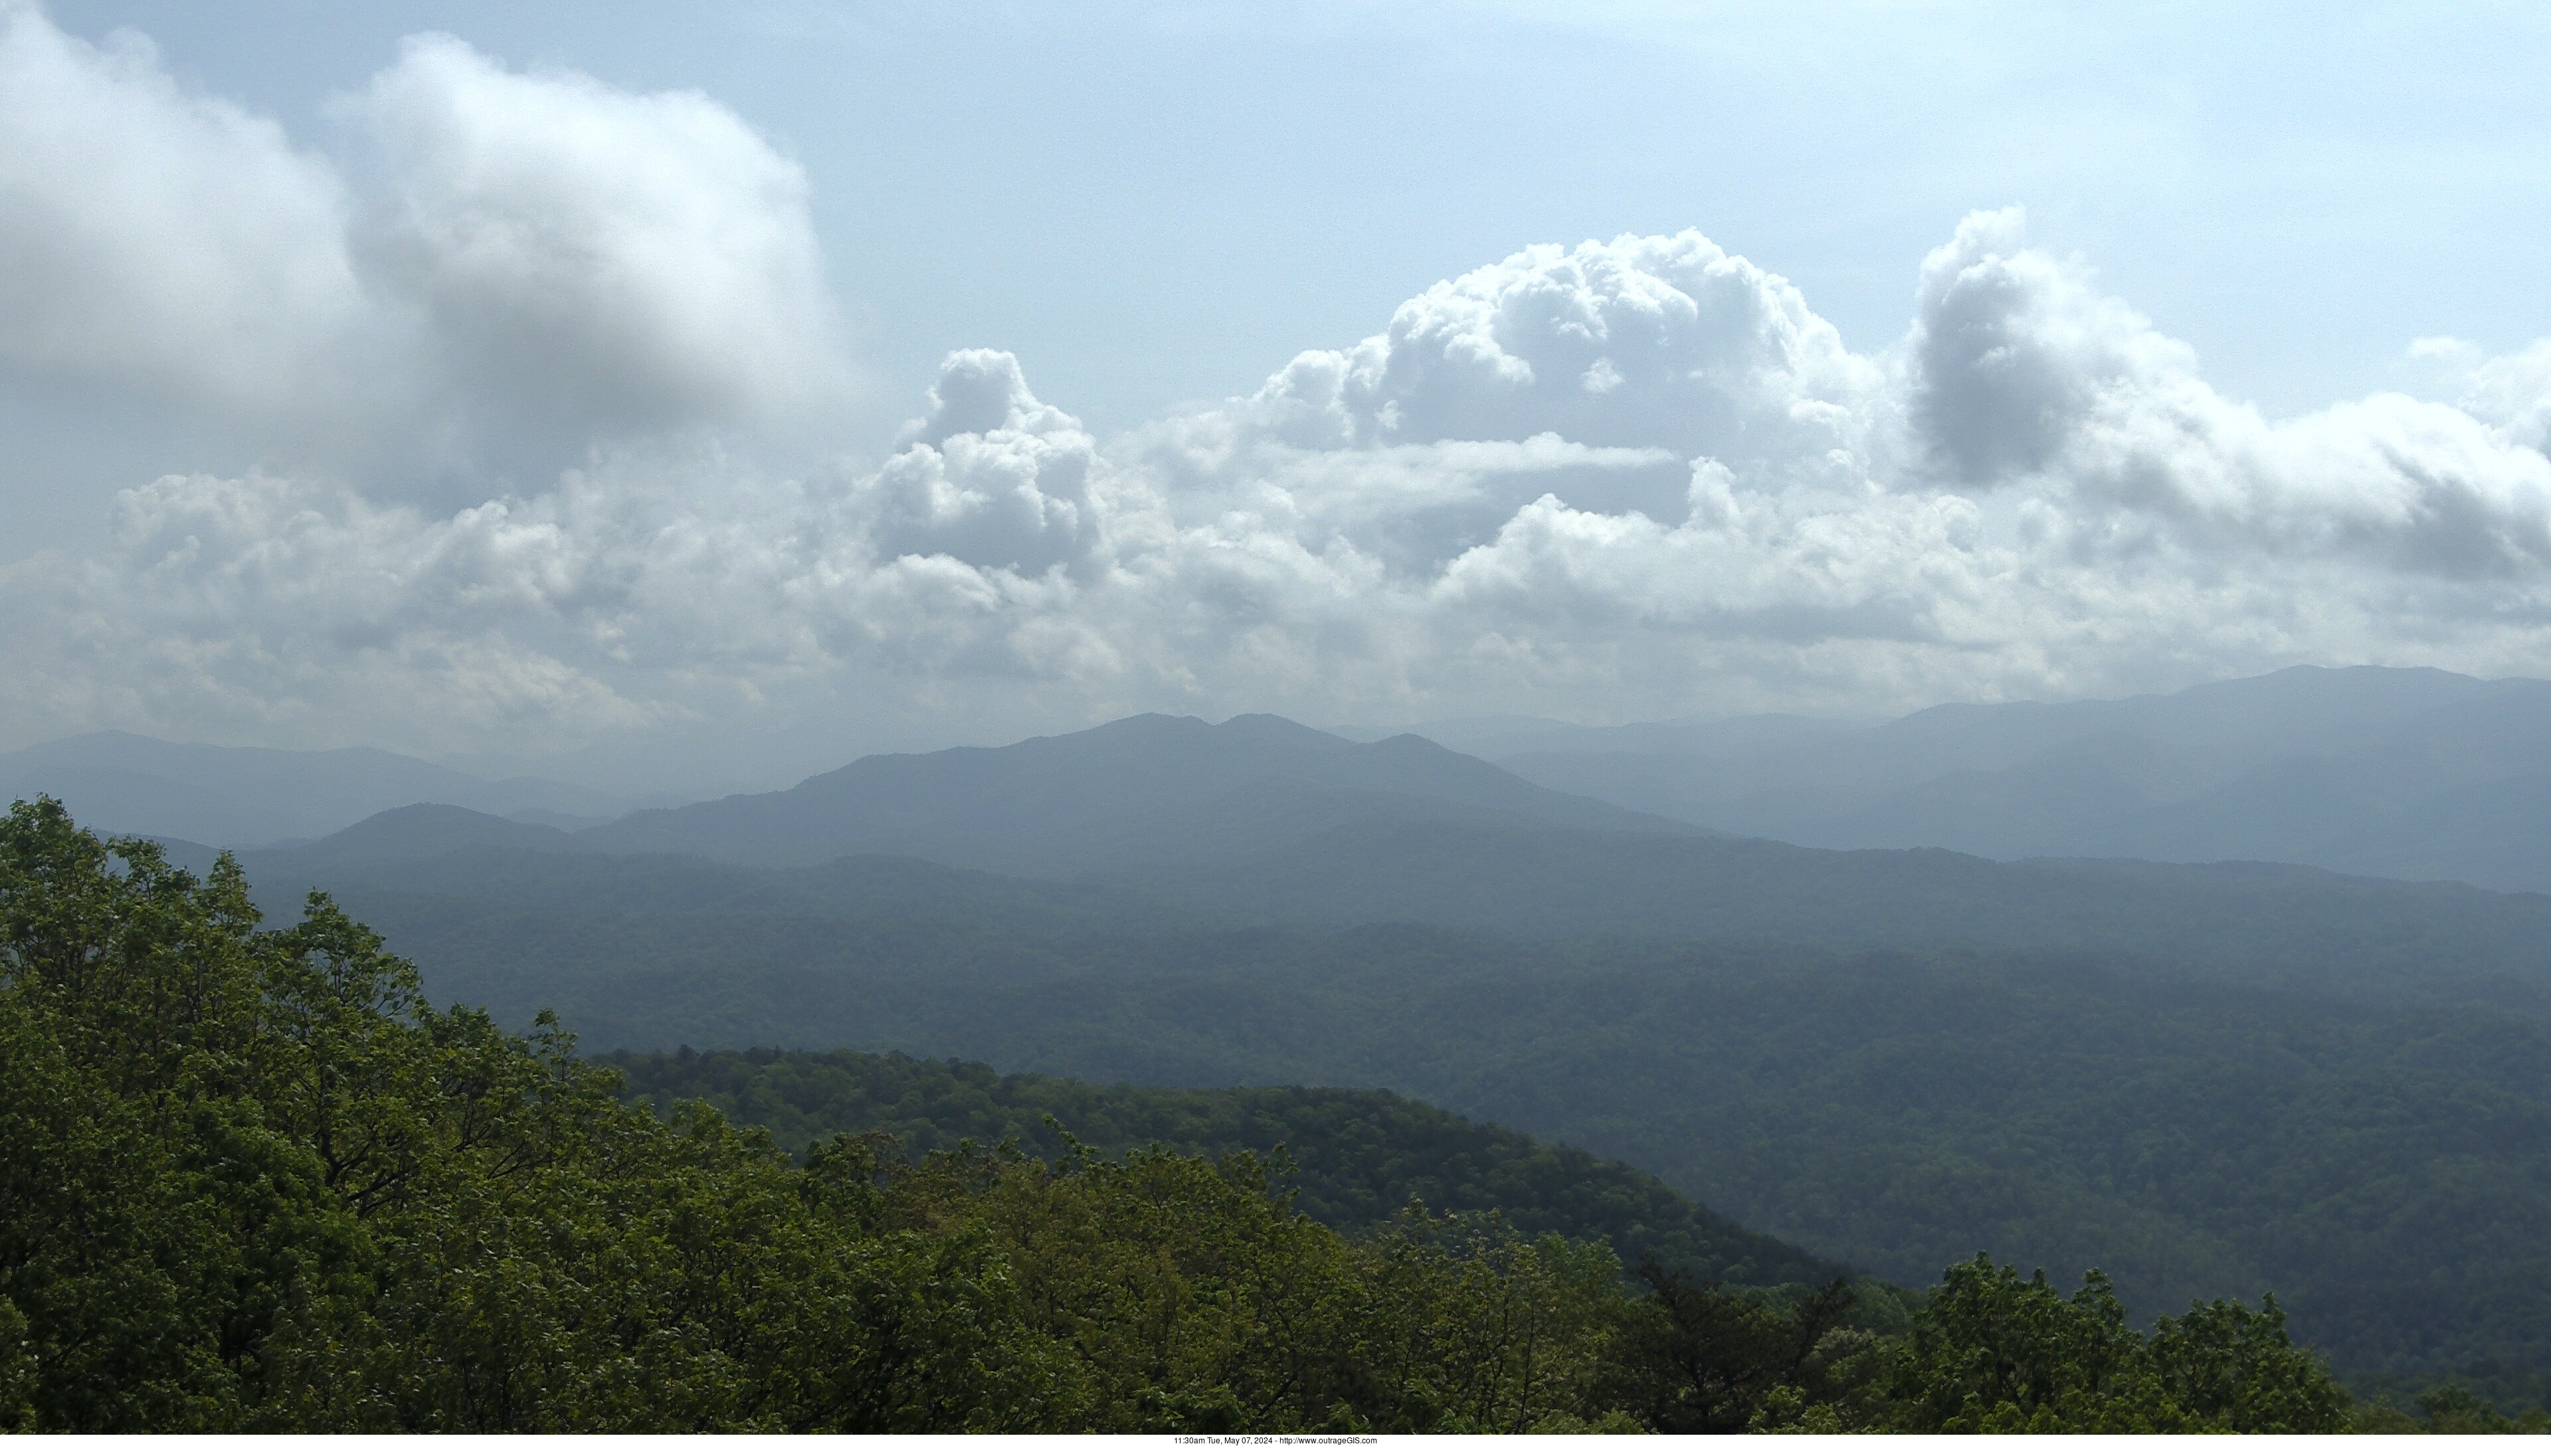 Live webcam for the Great Smokies